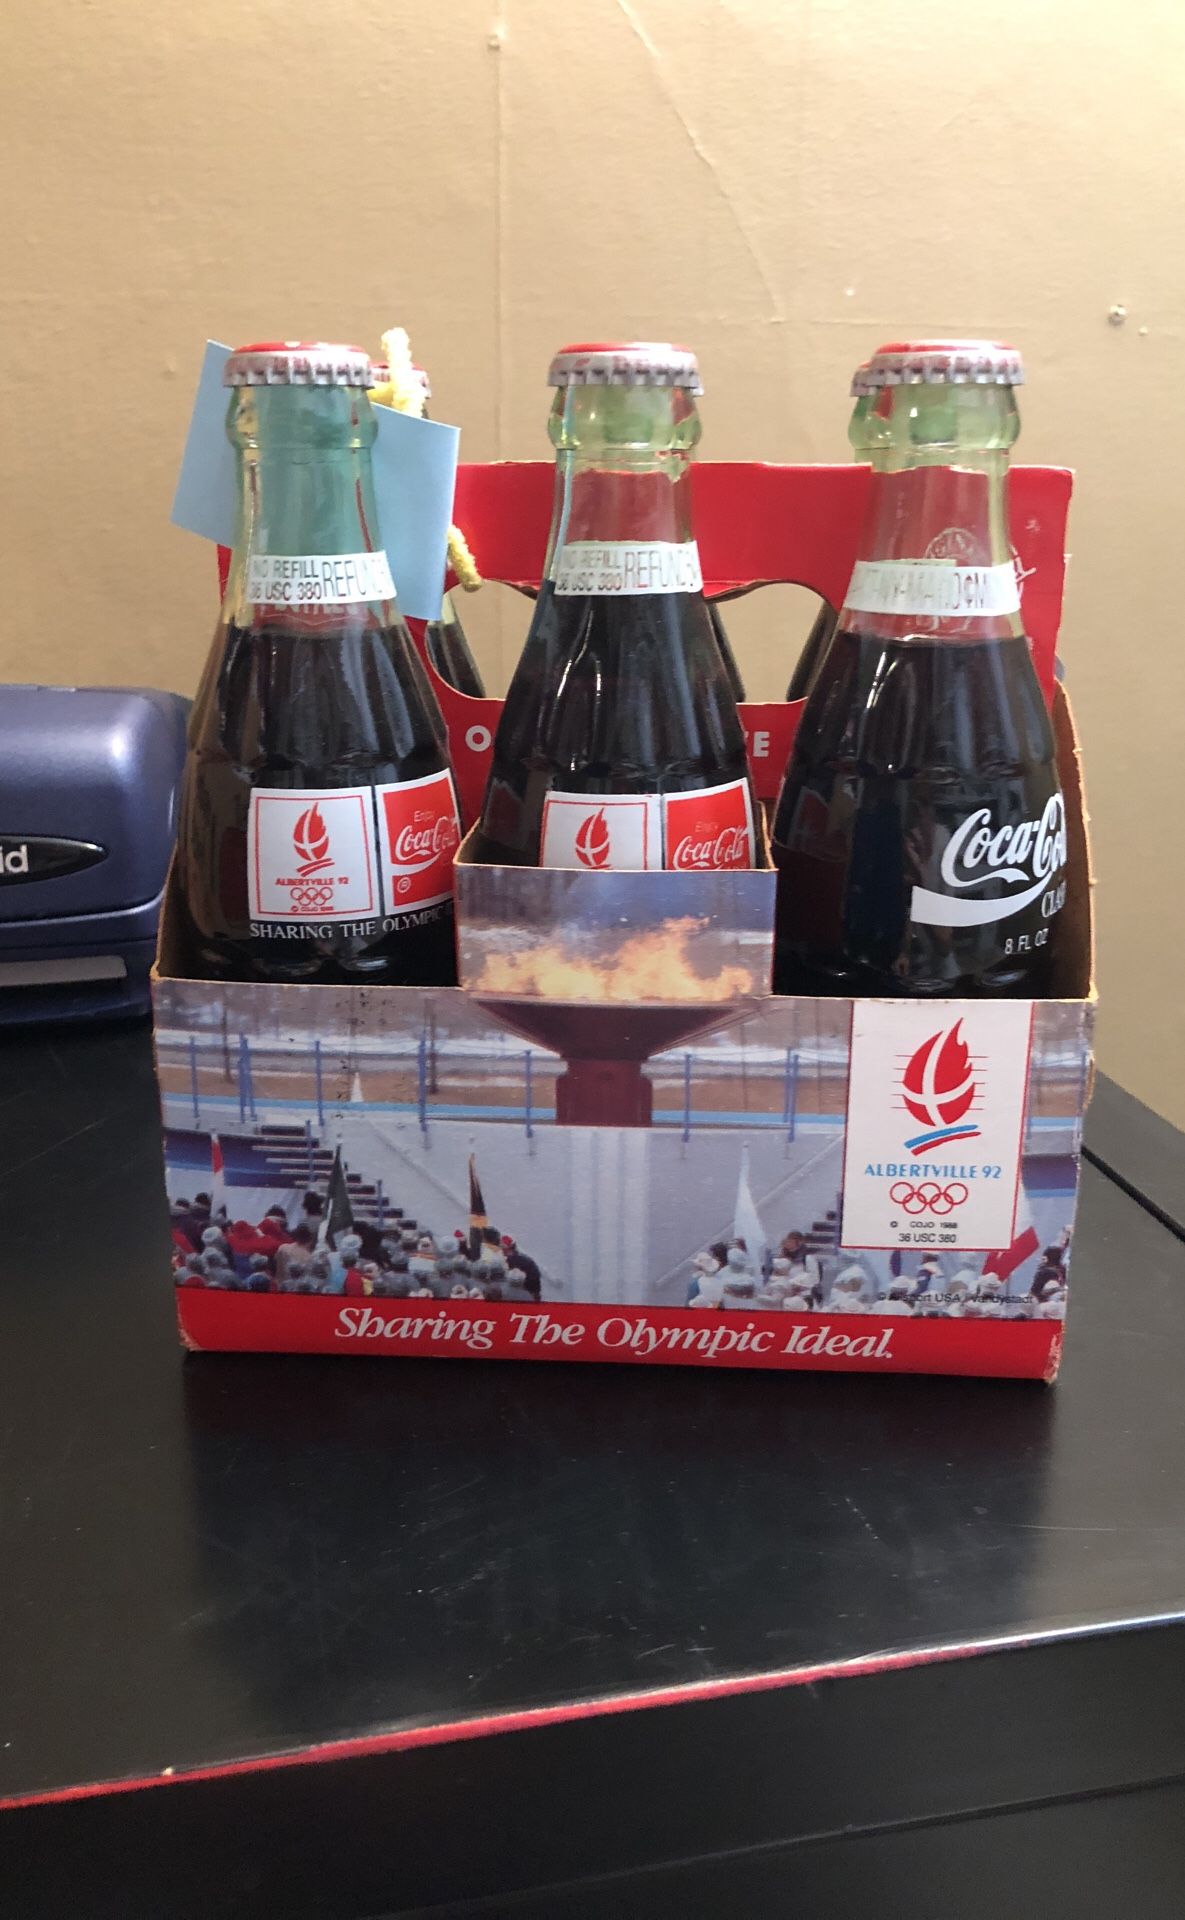 1992 Albertville Olympic Games Coca-Cola Six Pack